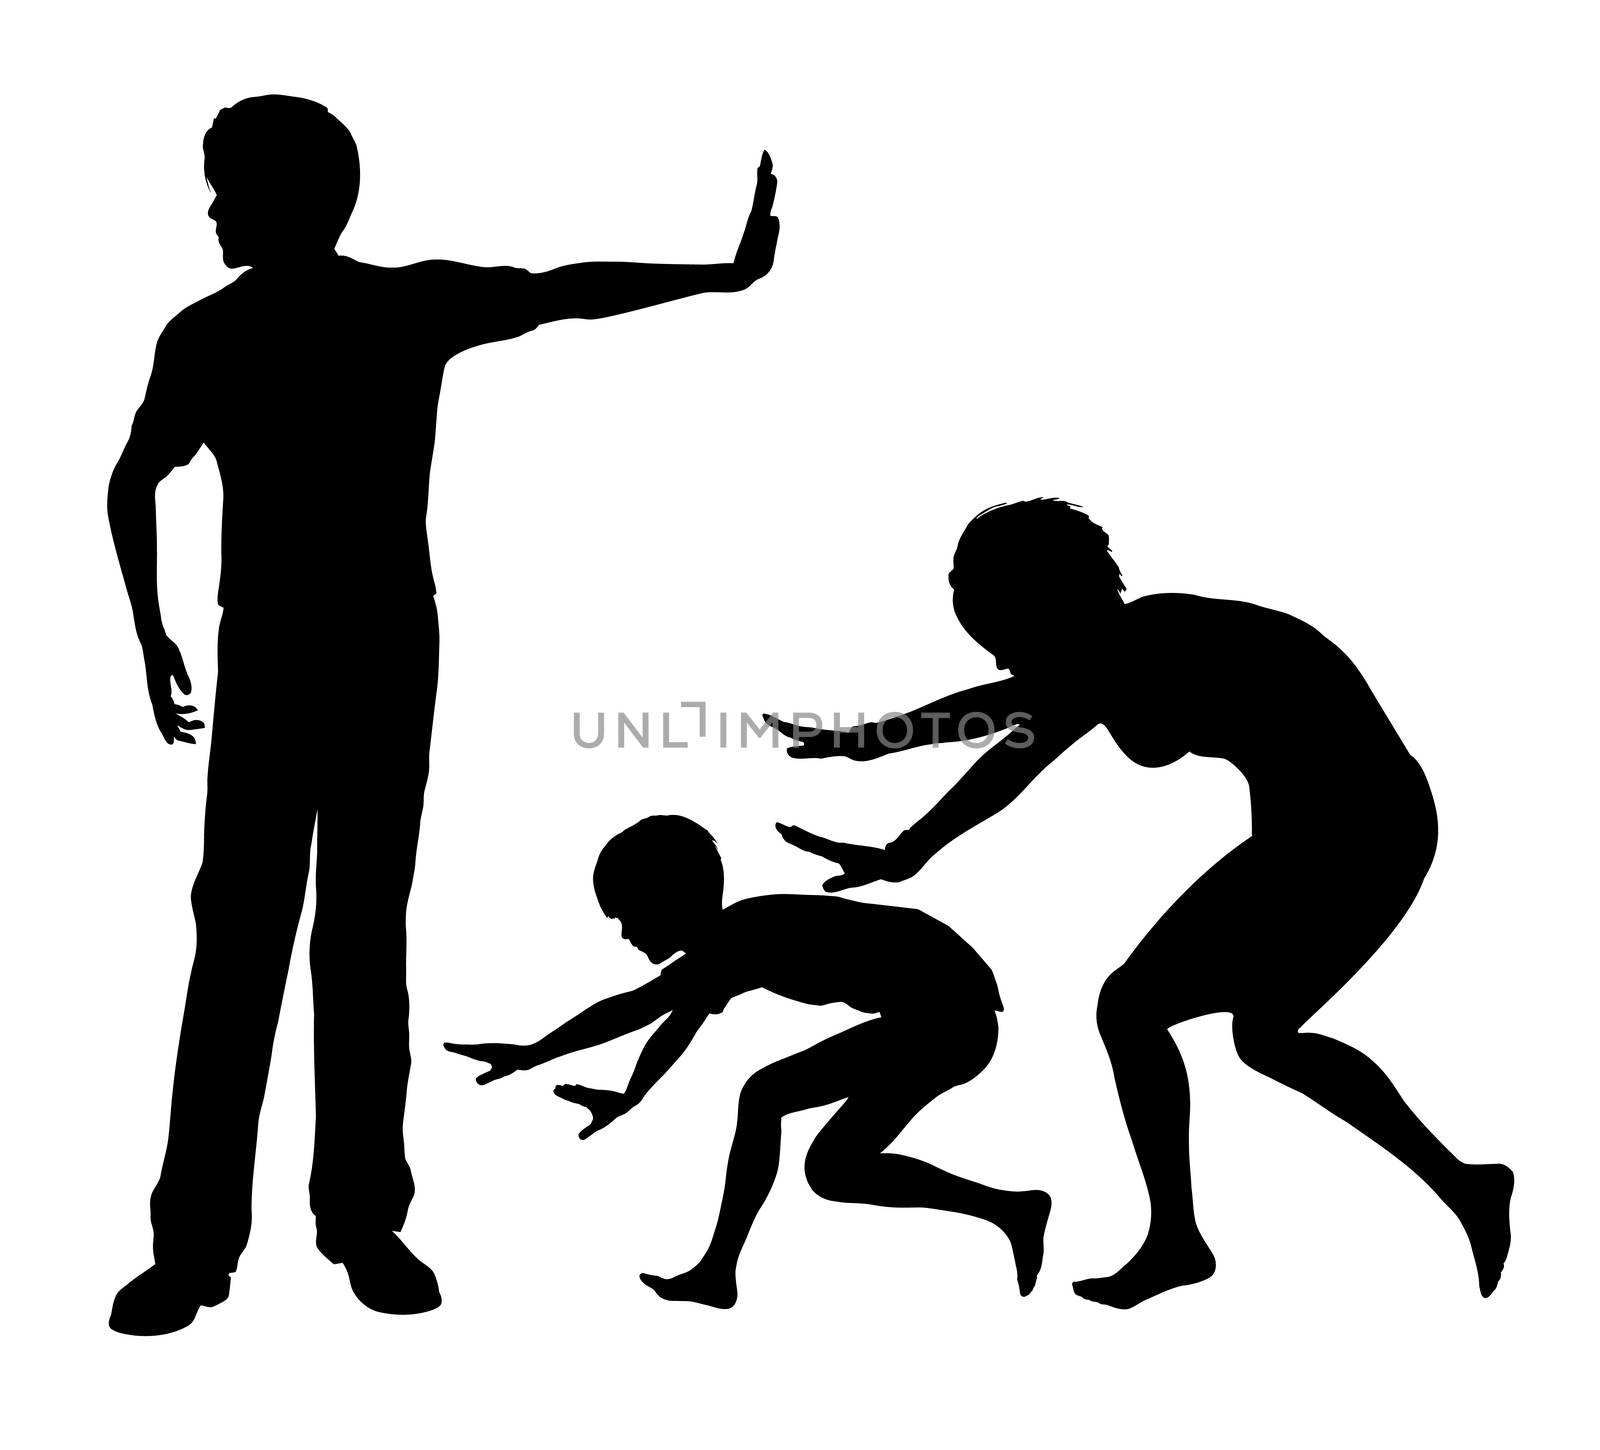 Concept sign of humiliation and mental cruelty within the family as part of domestic violence